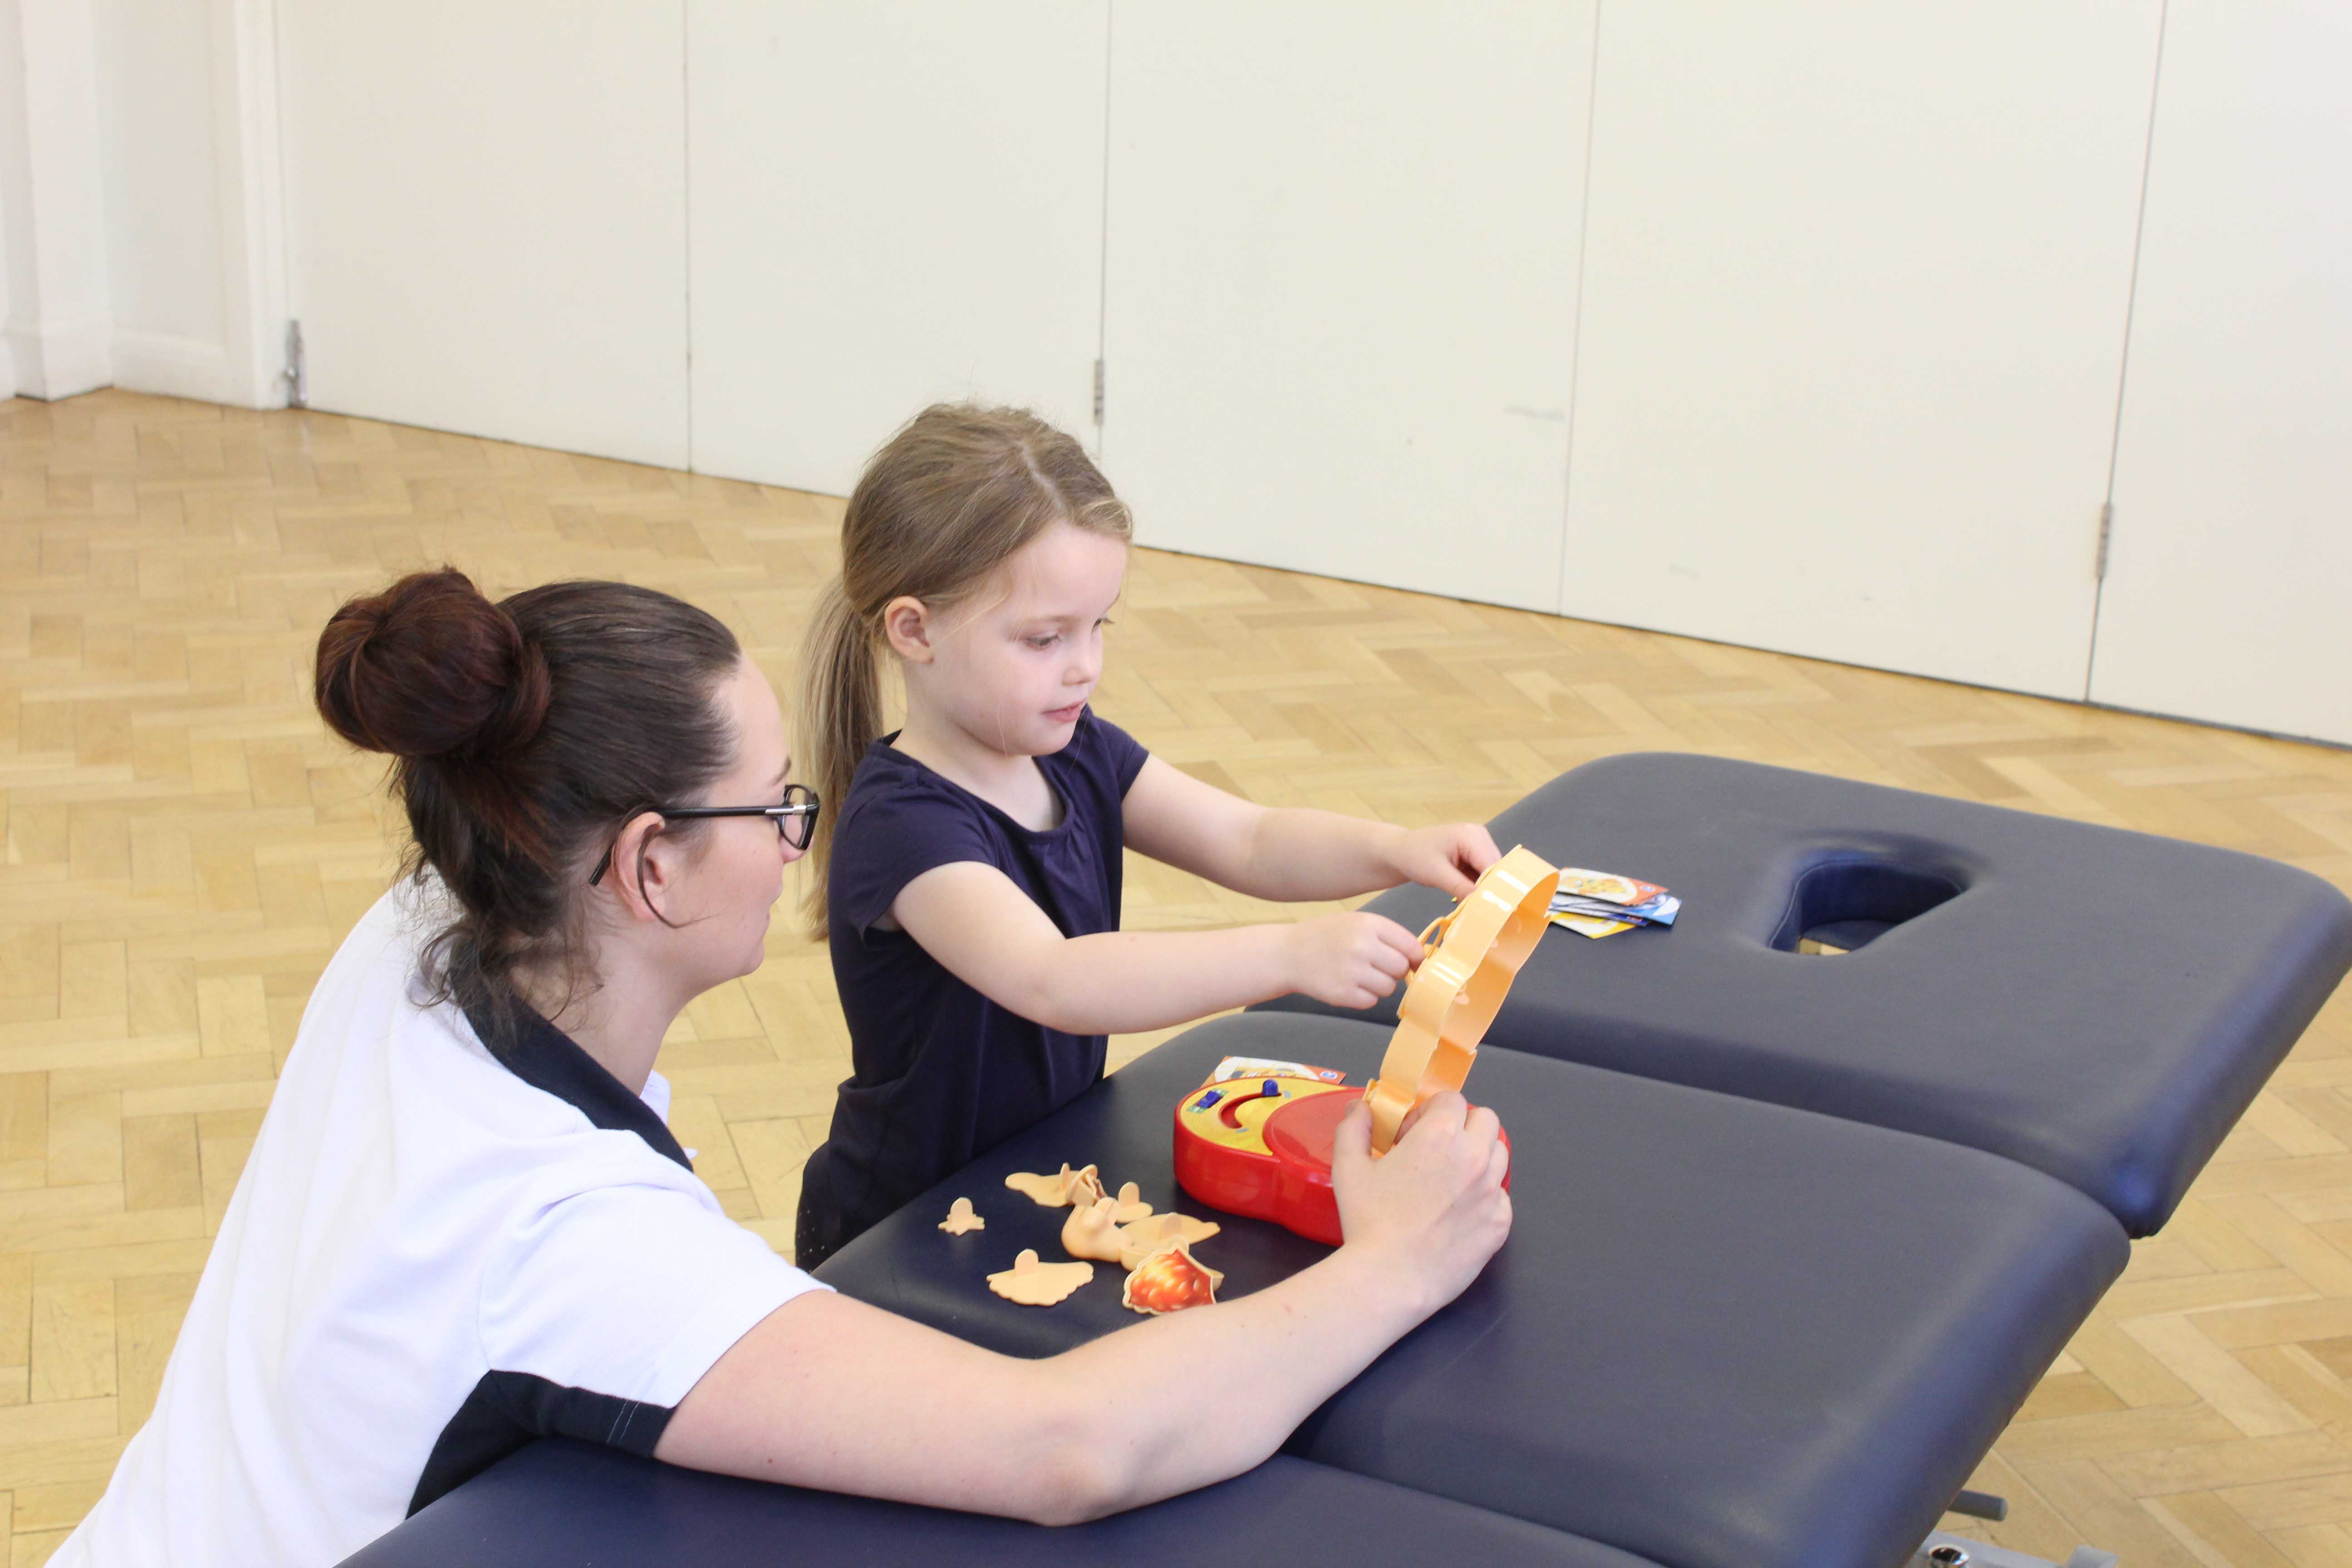 Fine motor skills and co-ordination exercises supervised by a paediatric physiotherapist